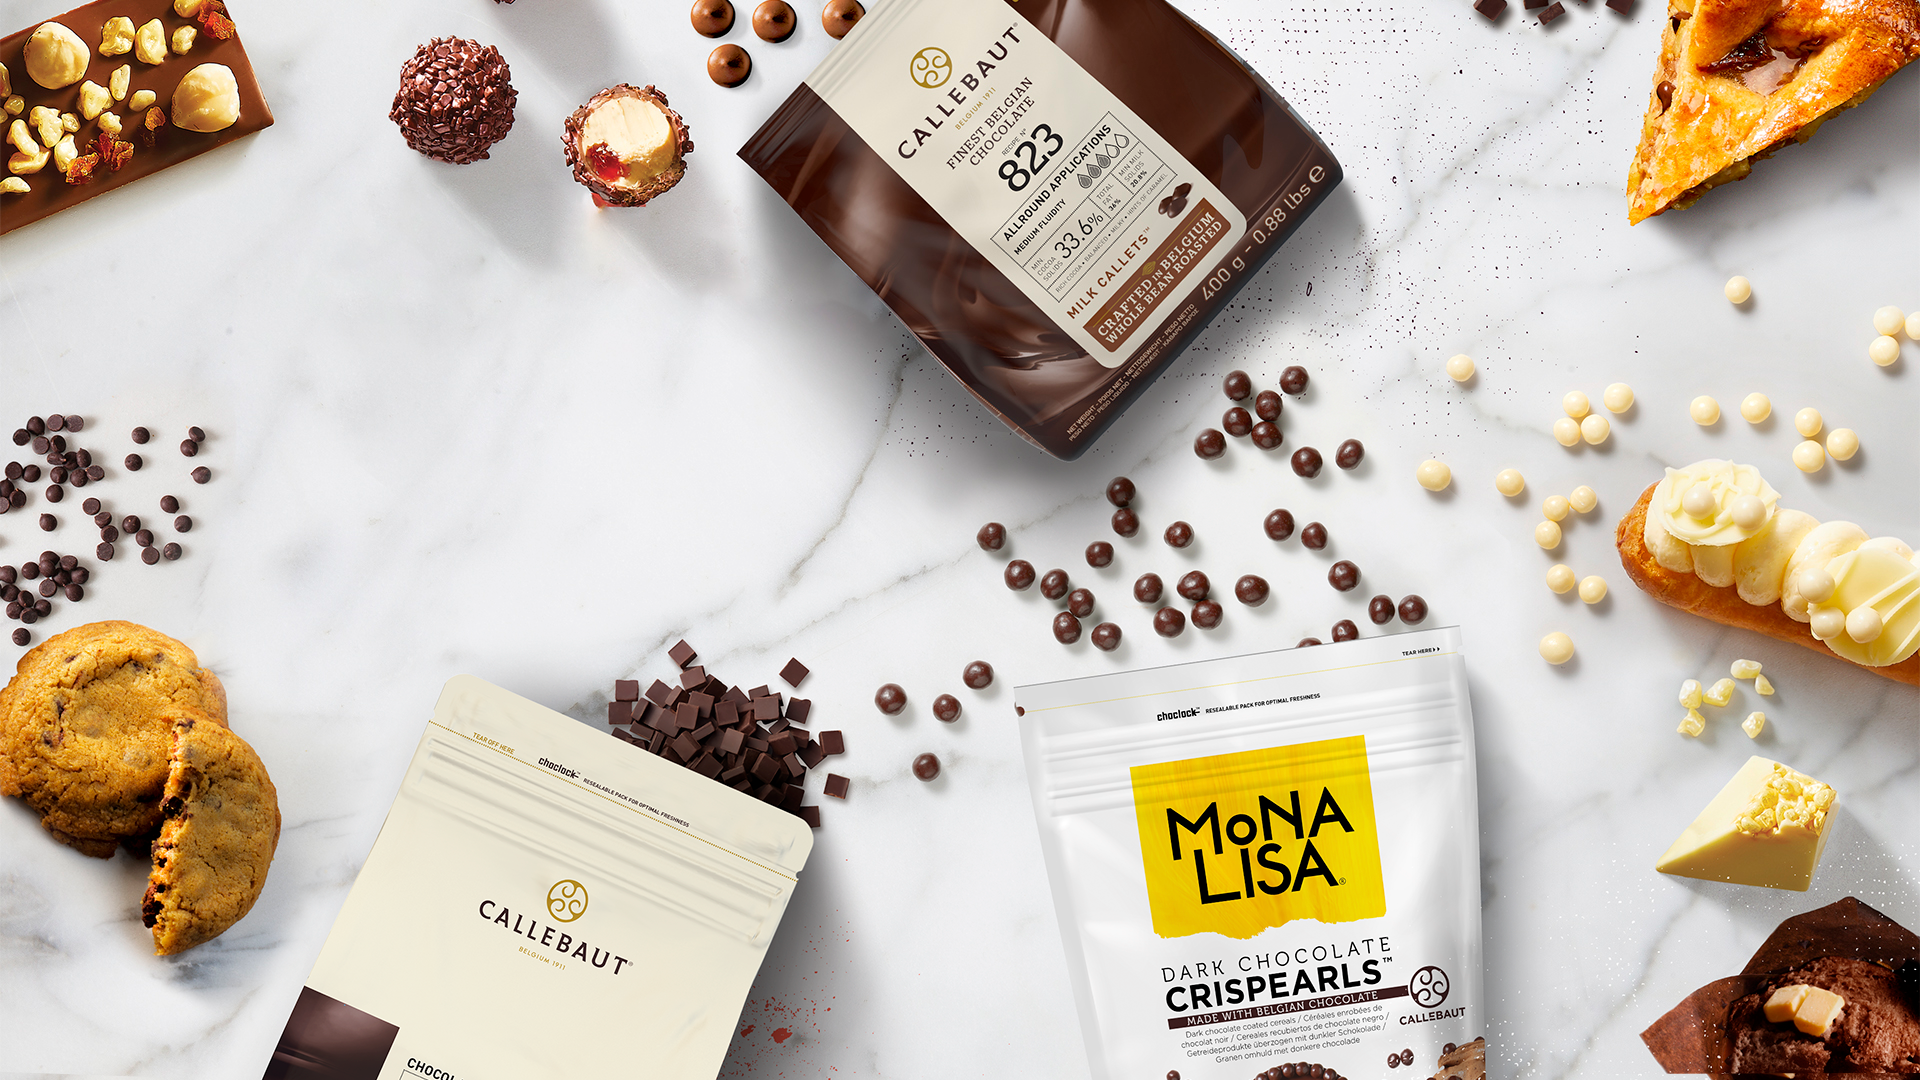 Callebaut's professional chocolate in smaller packs for everyday baking 